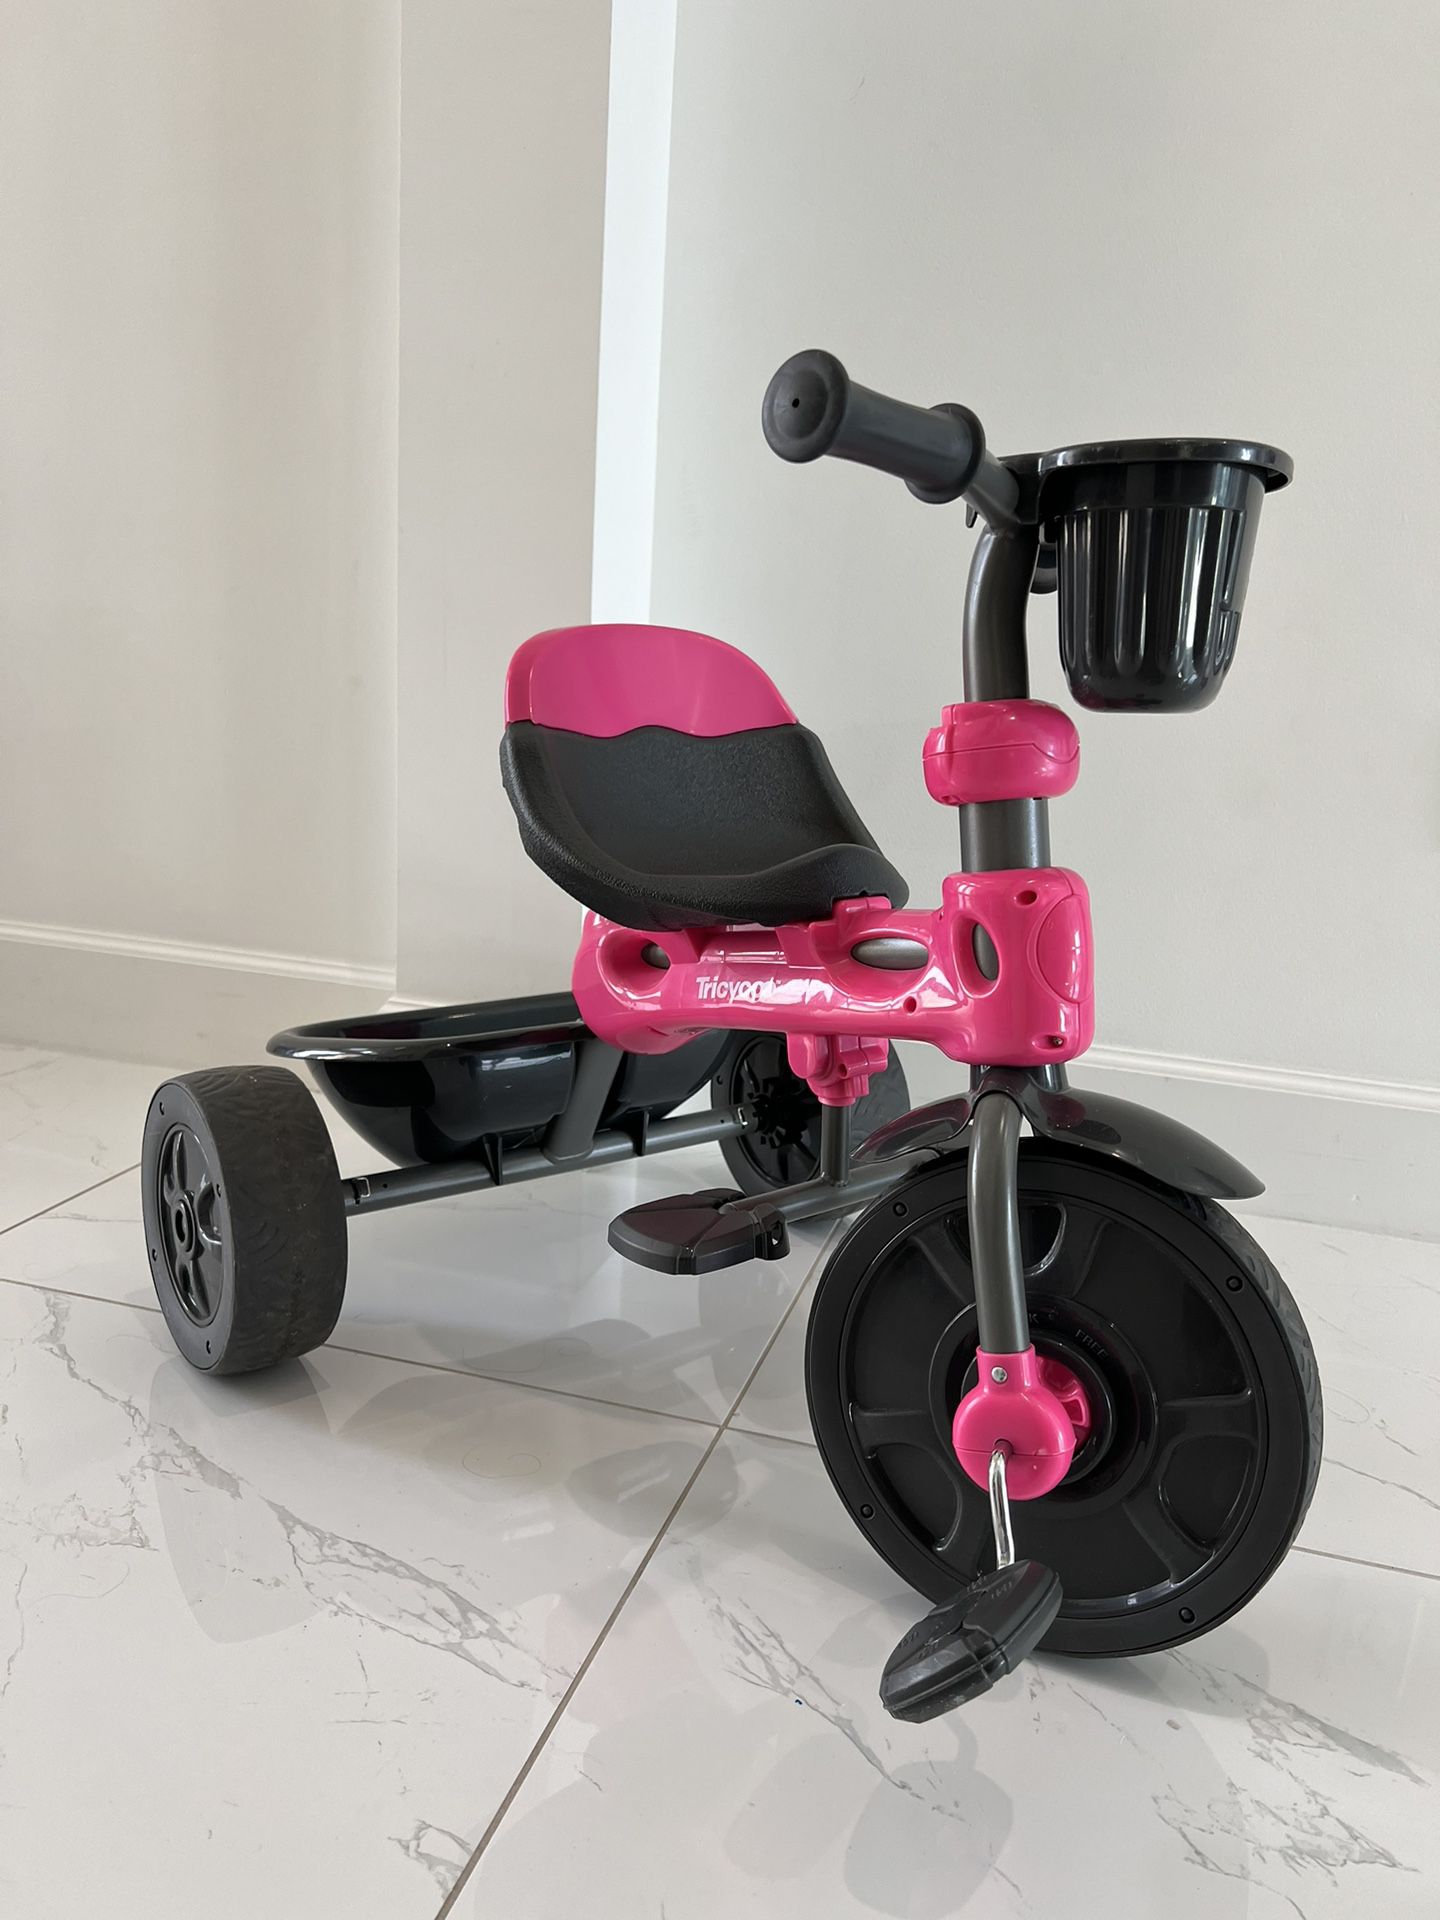 Joovy Tricycle For Kids